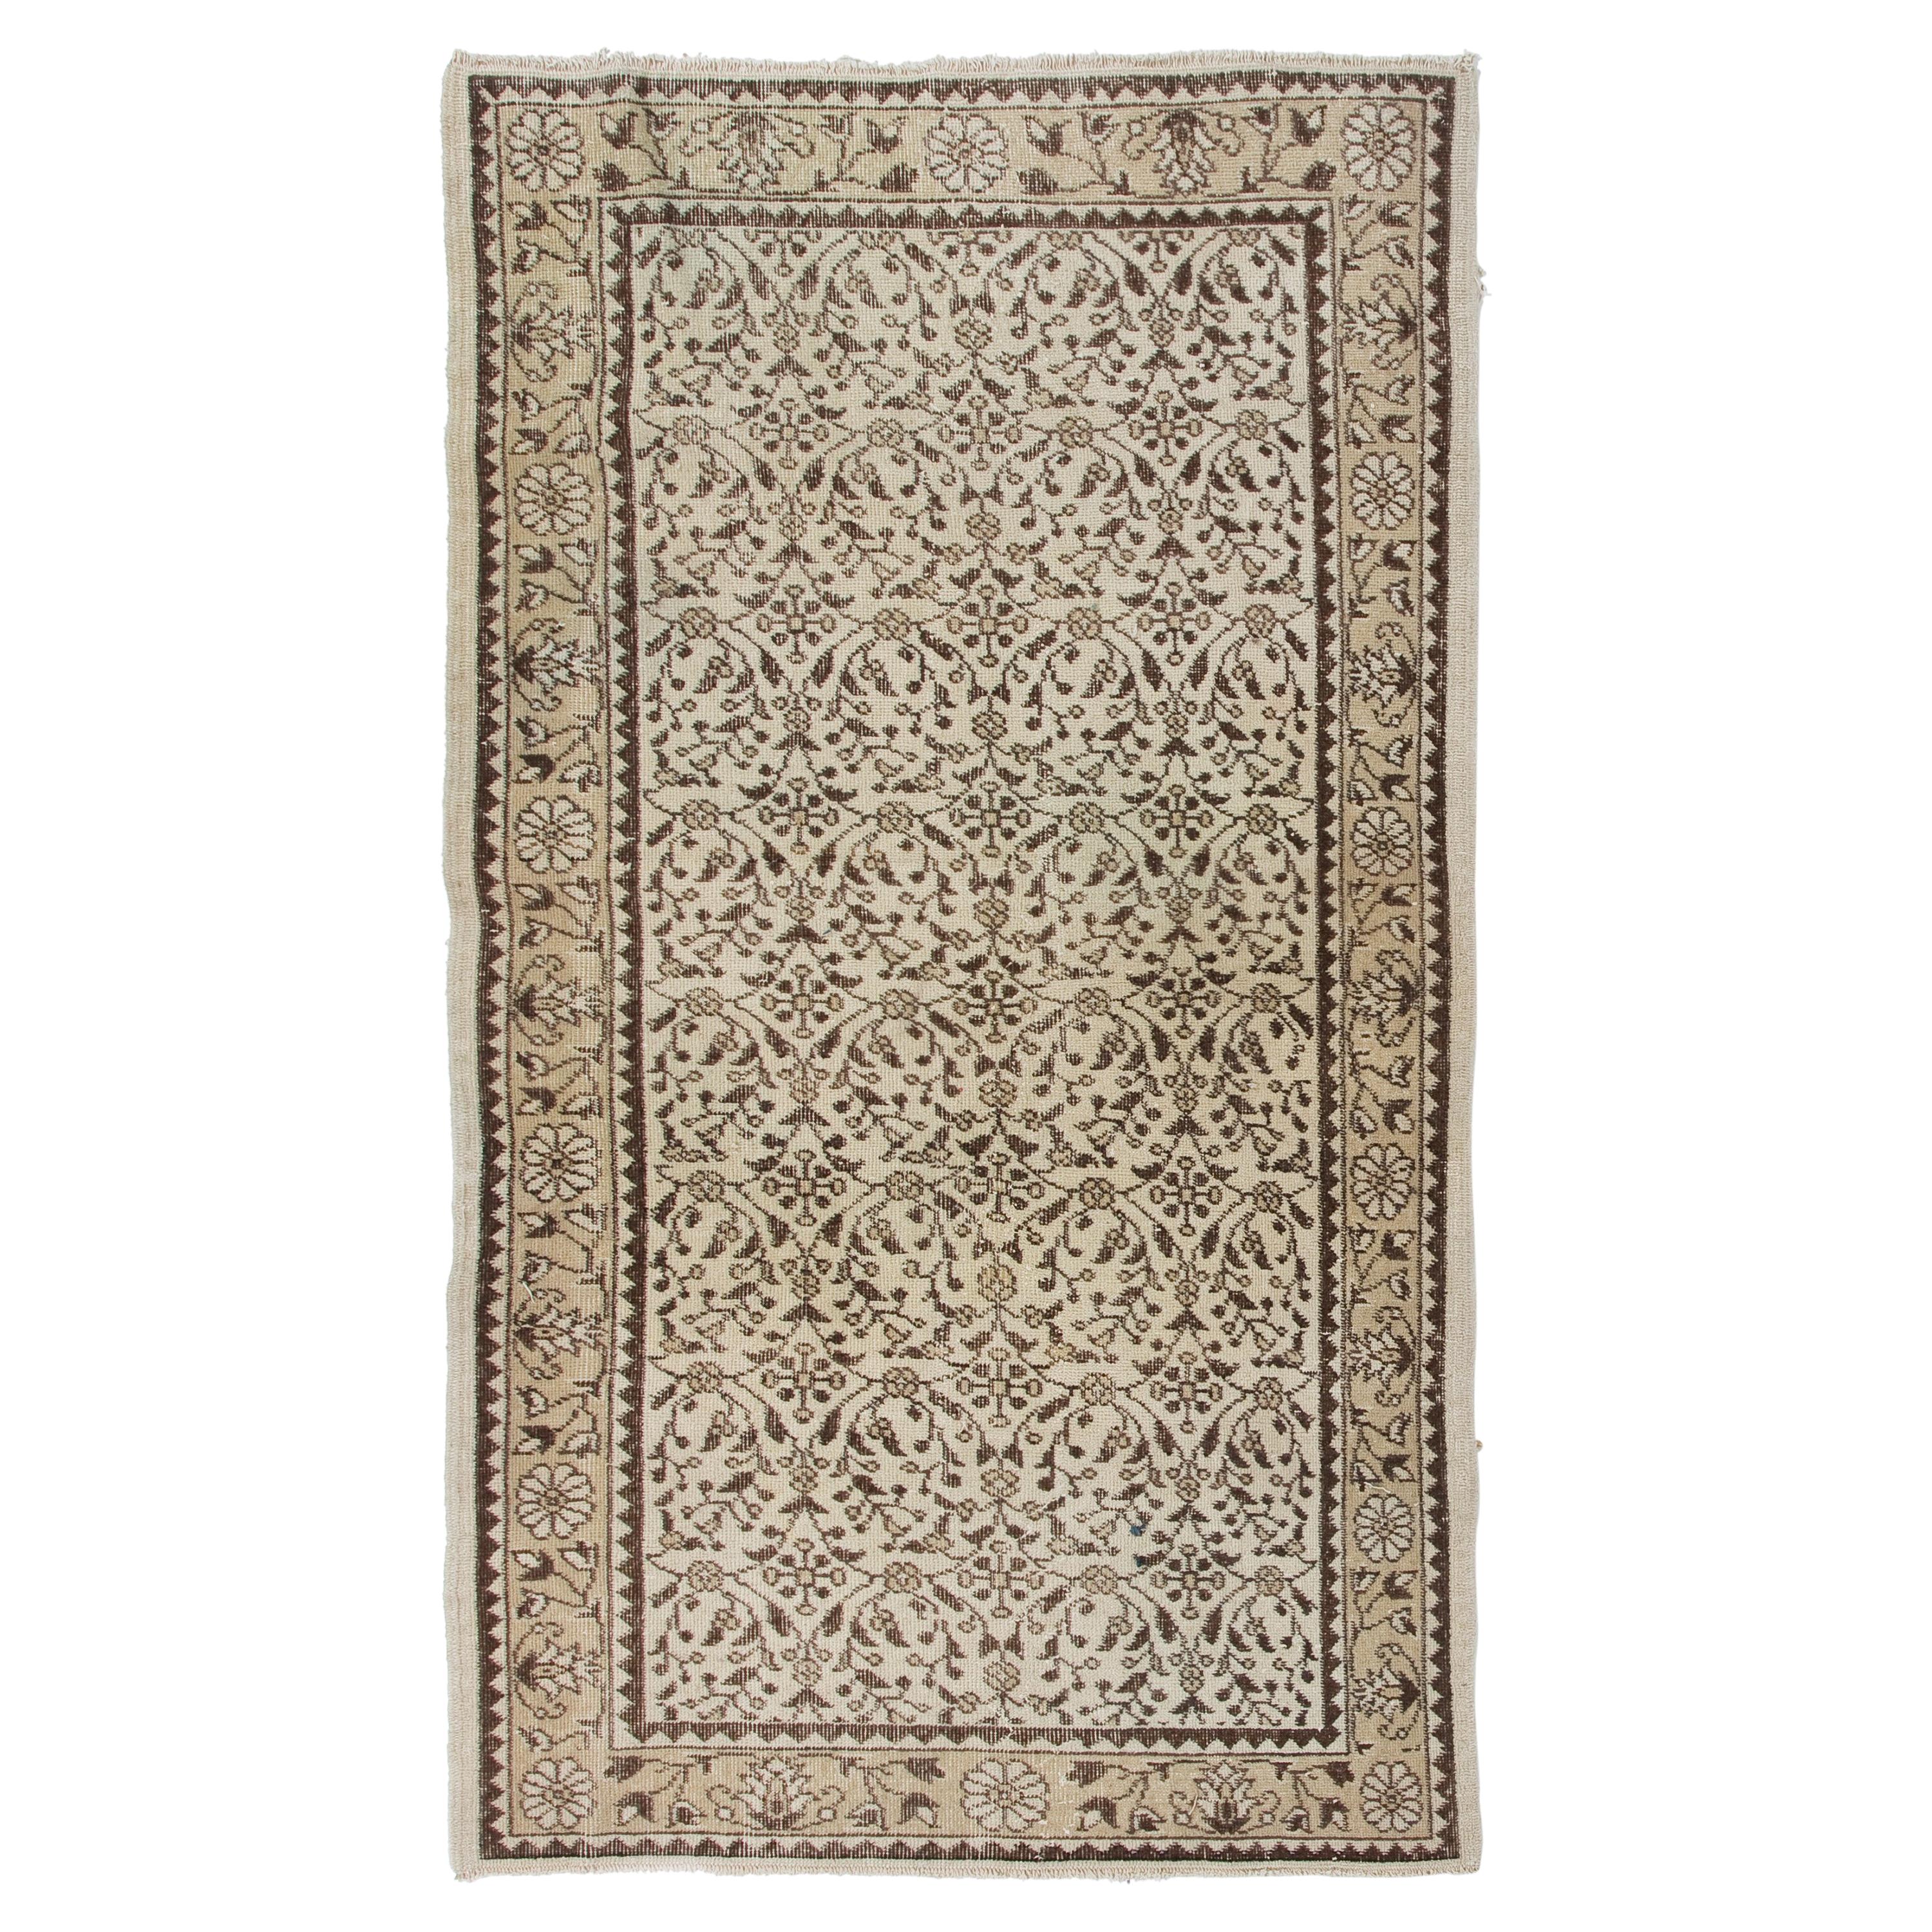 4x7 Ft Vintage Floral Distressed Hand-Knotted Wool Accent Rug in Brown, Beige For Sale